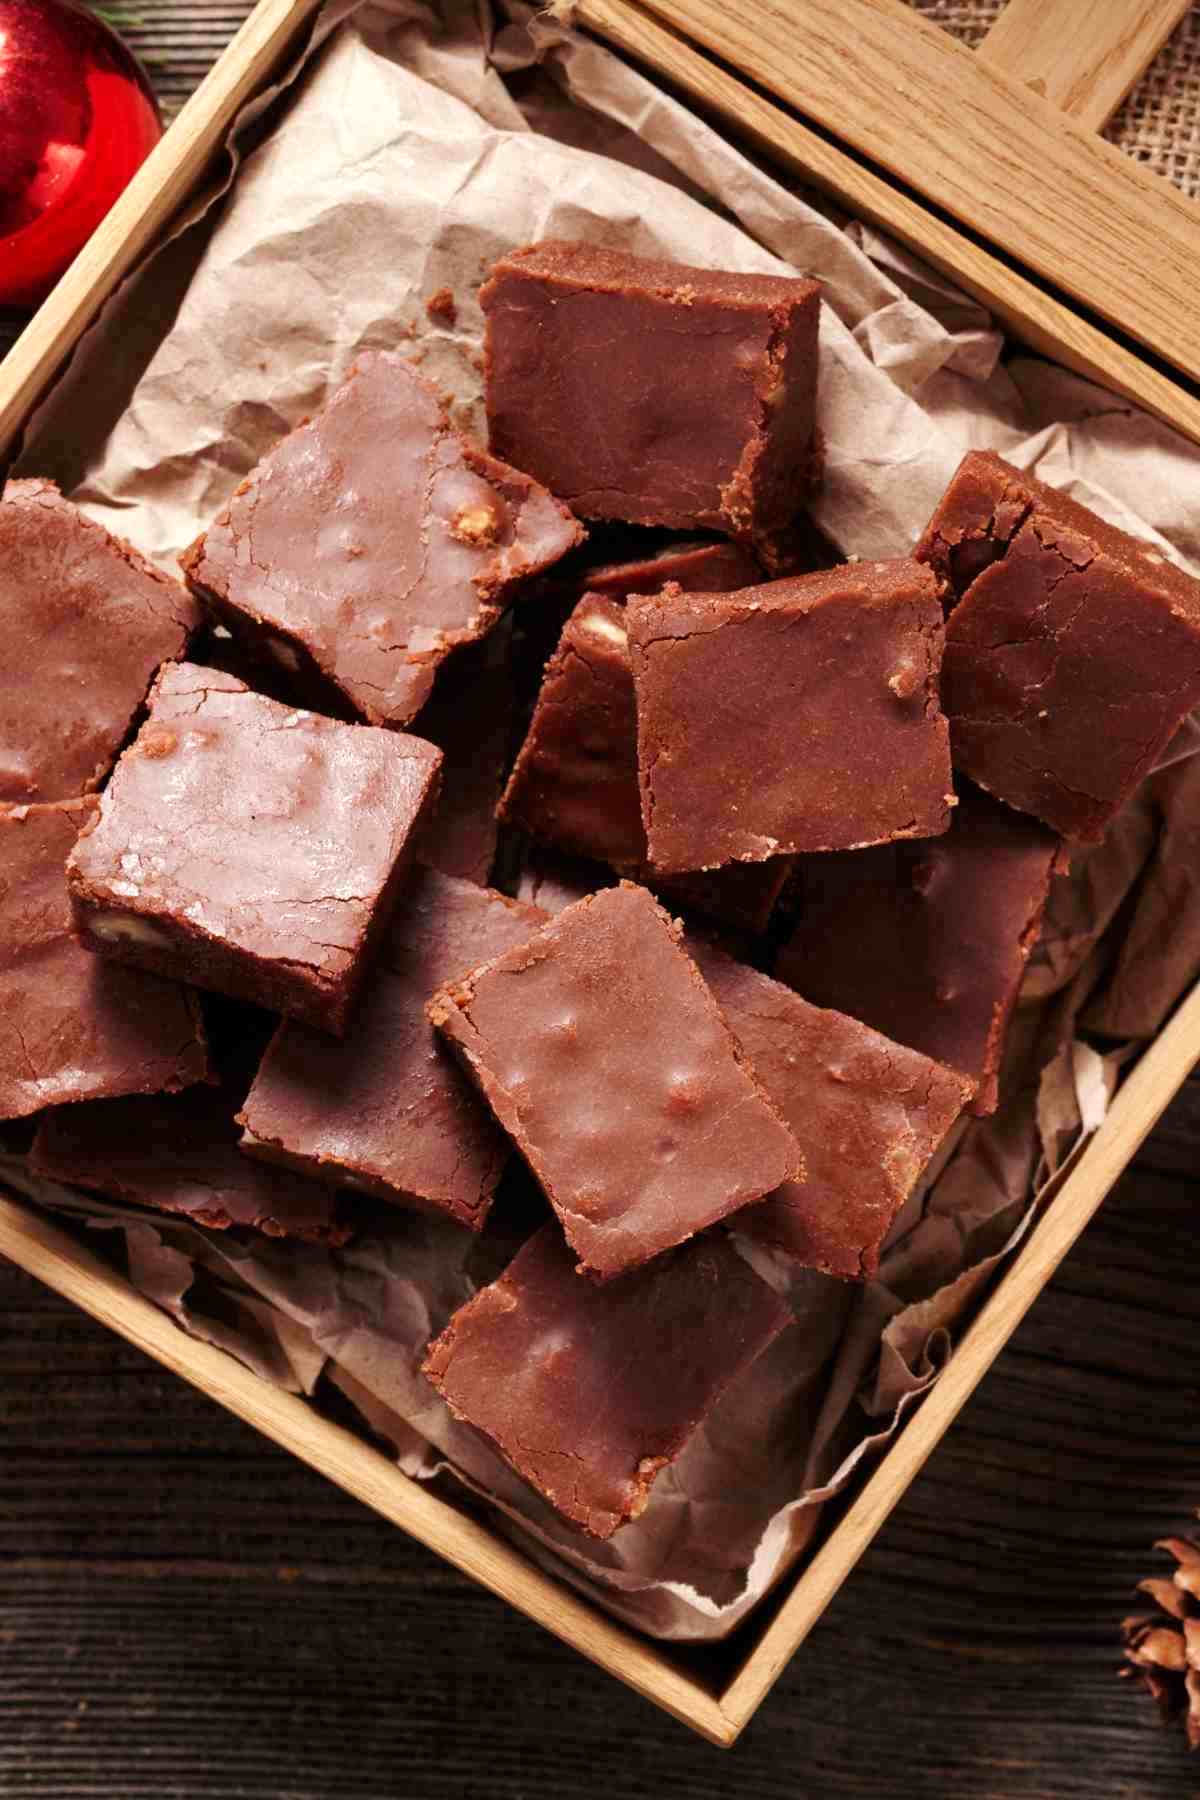 This simple fudge recipe is made without condensed milk. It’s sweet, creamy, chocolatey, and super easy to make.